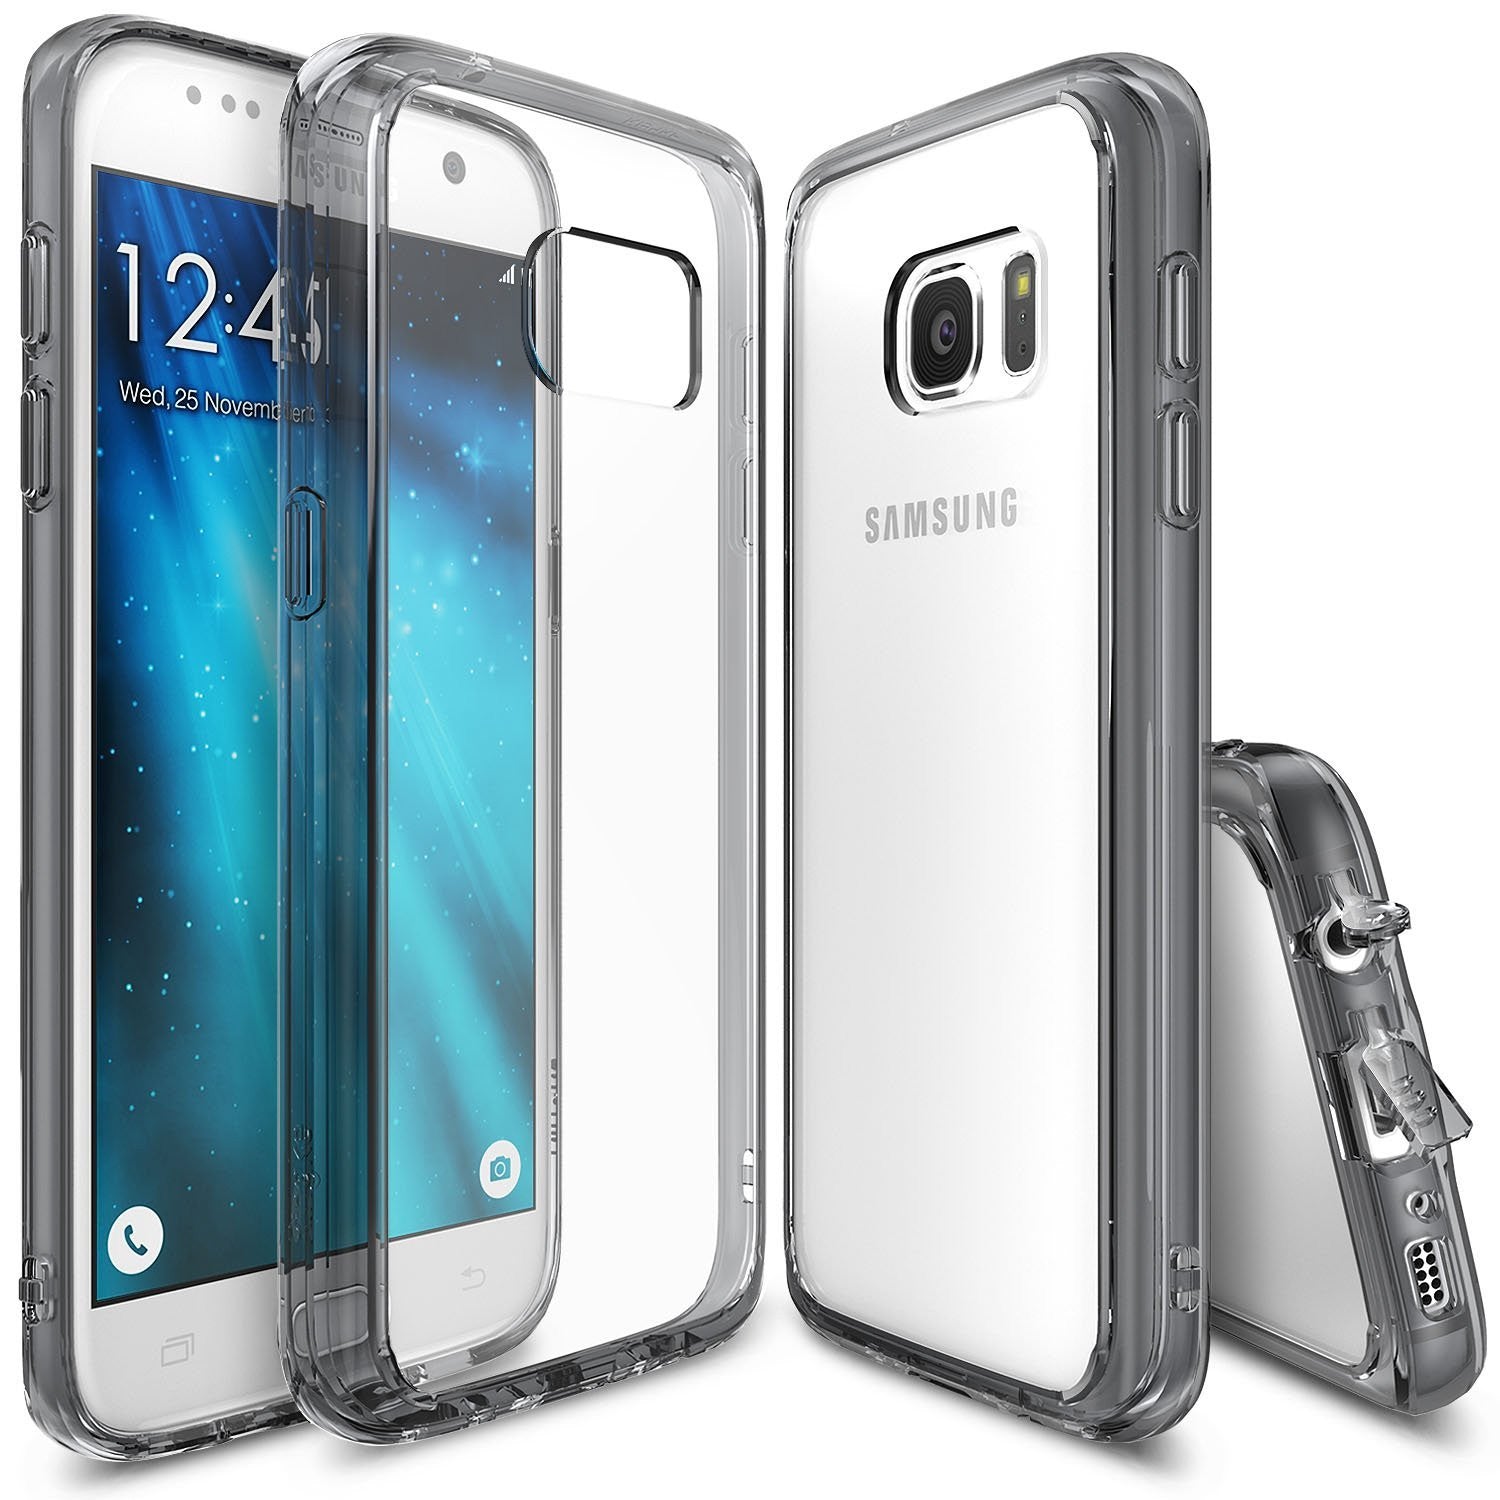 ringke fusion clear transparent hard back cover case for galaxy s7 smoke black